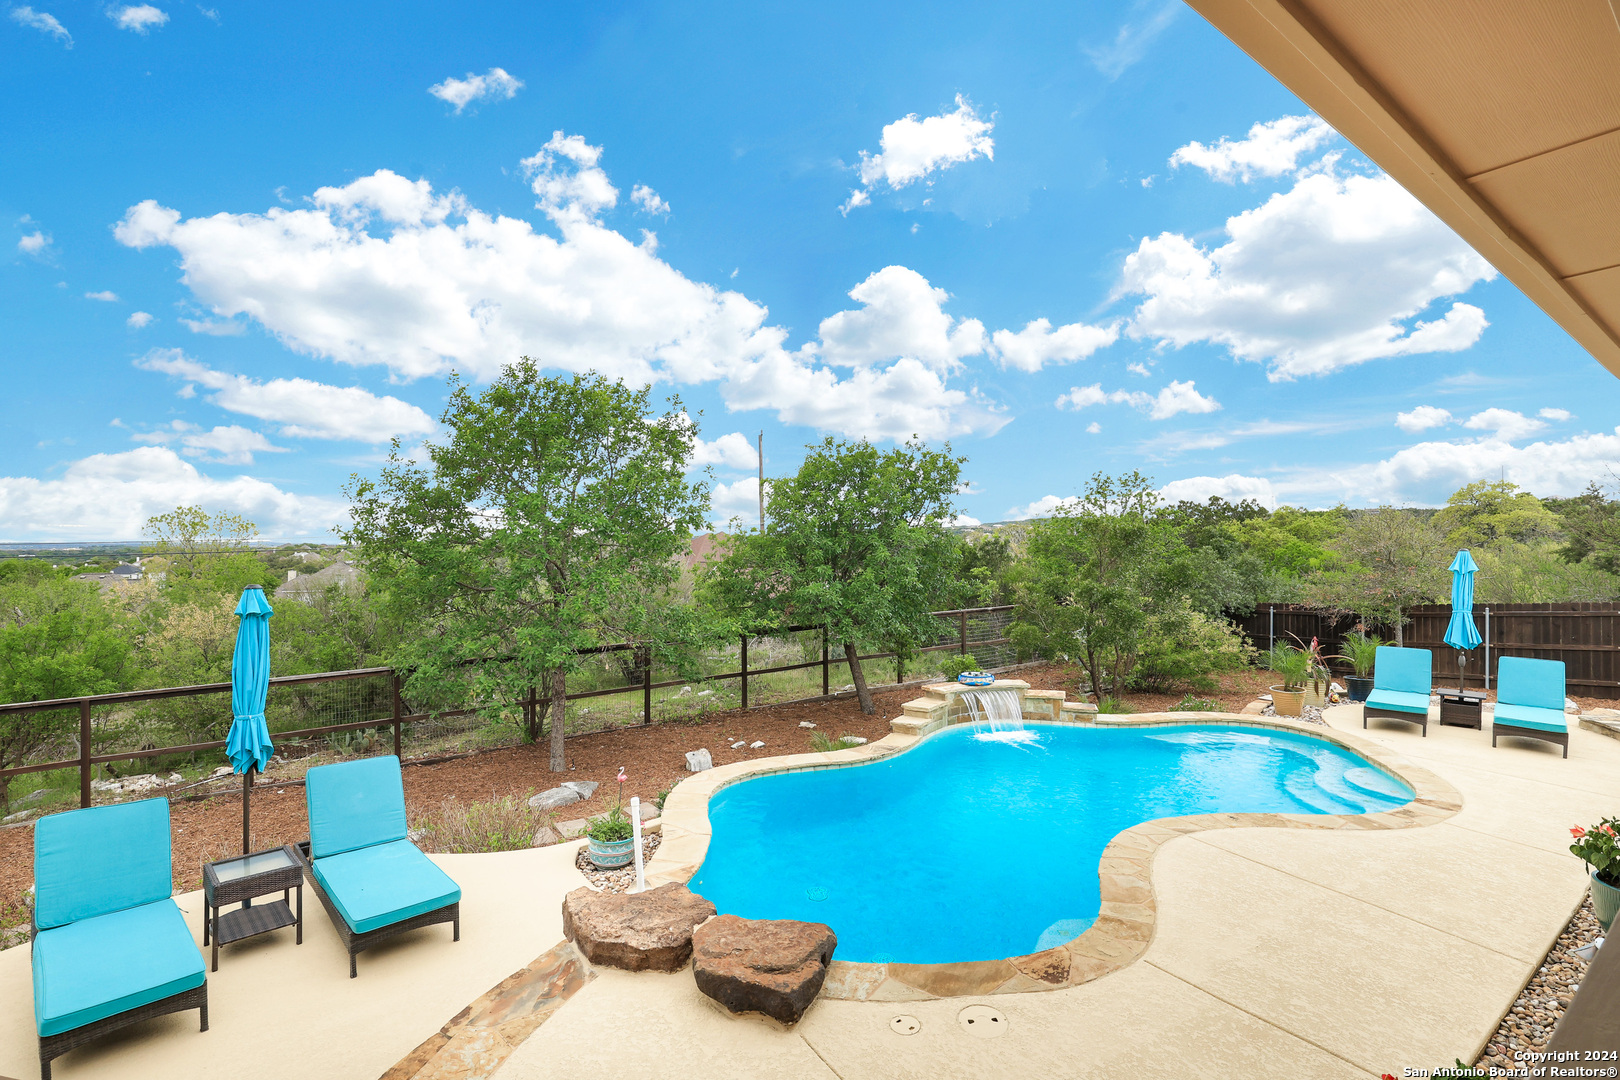 Photo of 13180 Adobe Walls Dr in Helotes, TX